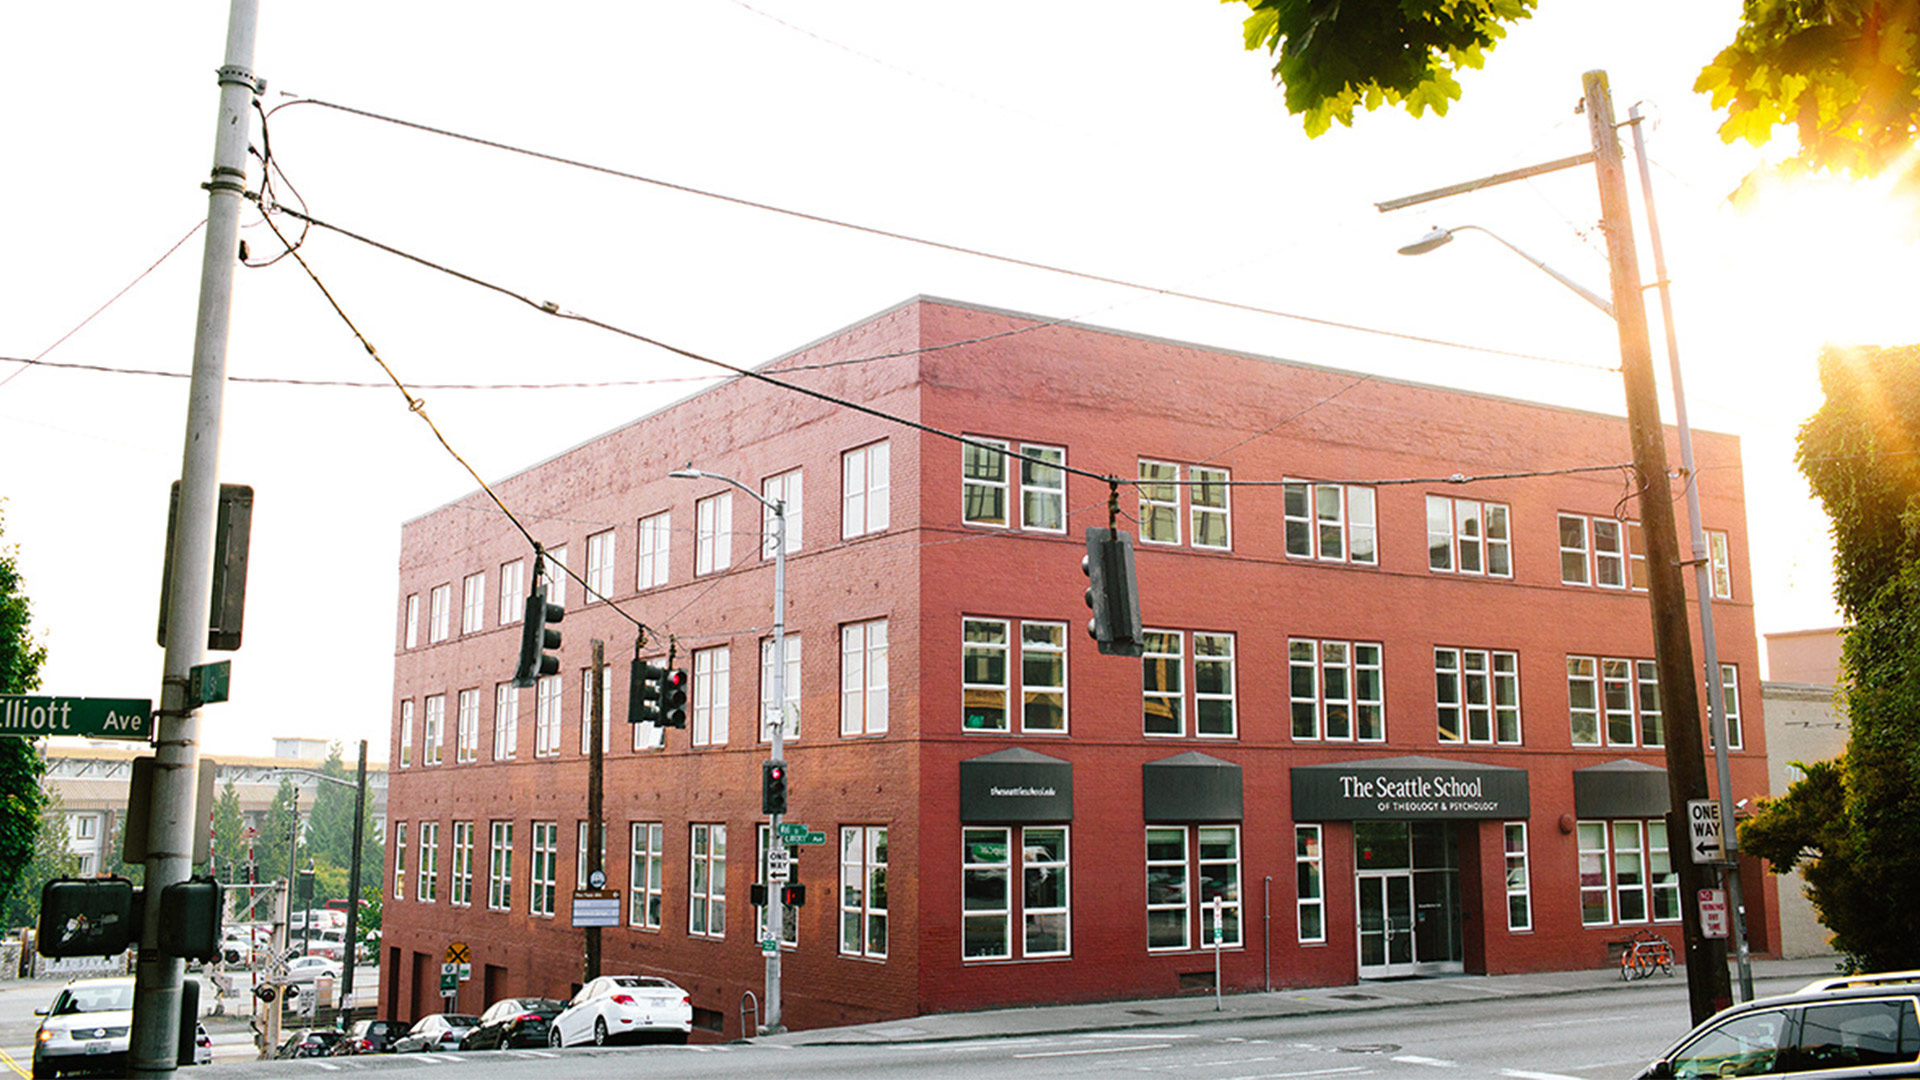 the exterior of the seattle school